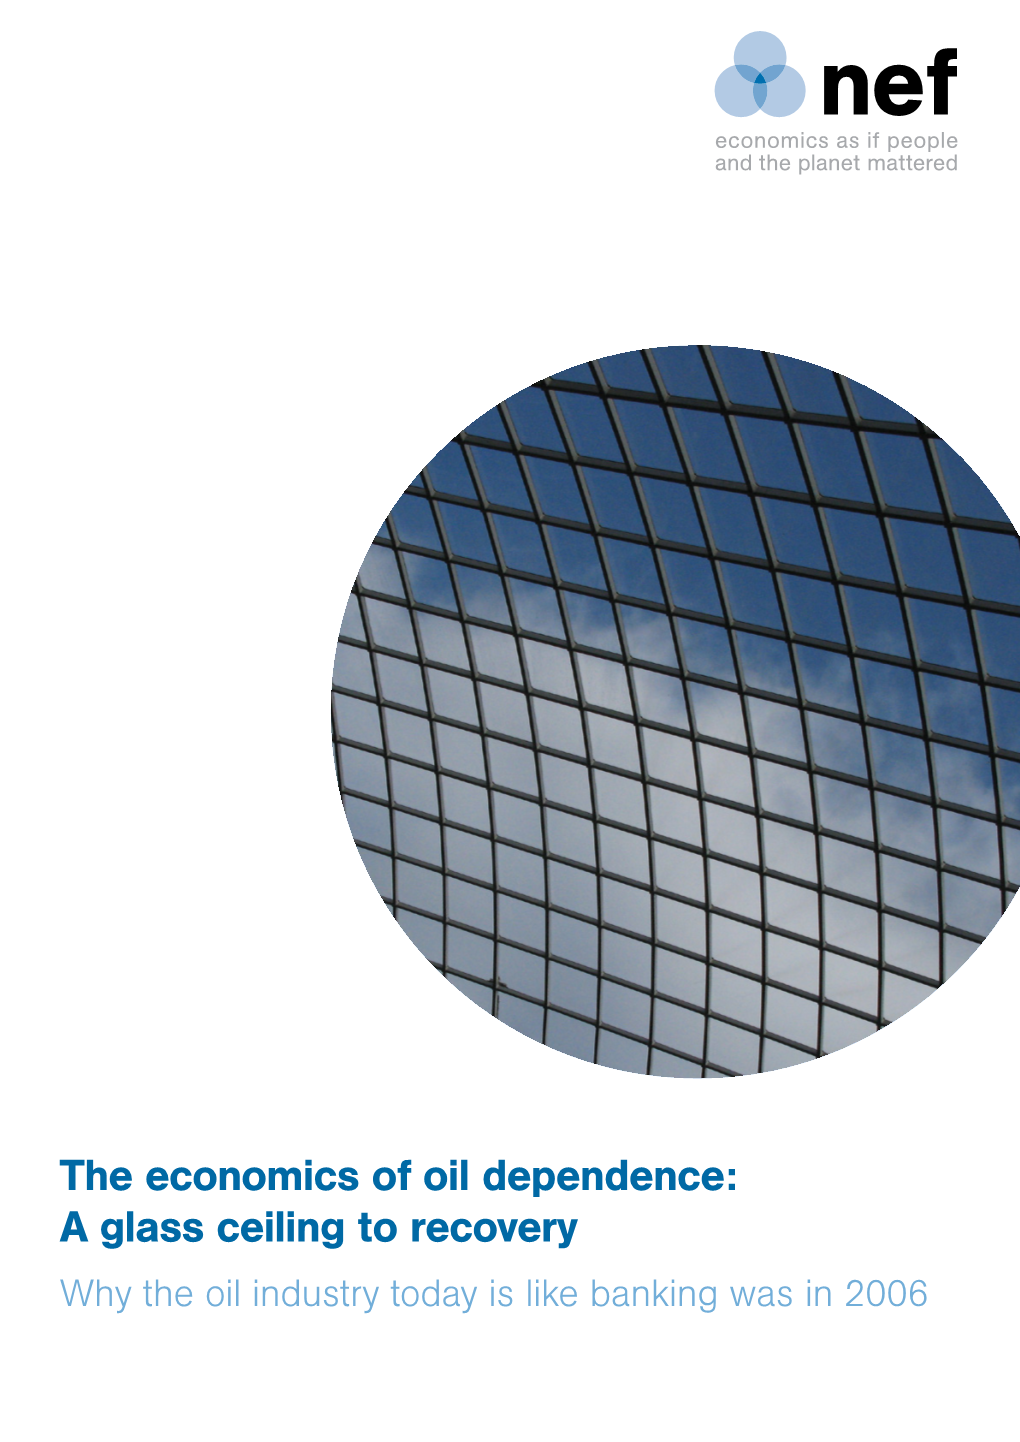 The Economics of Oil Dependence: a Glass Ceiling to Recovery